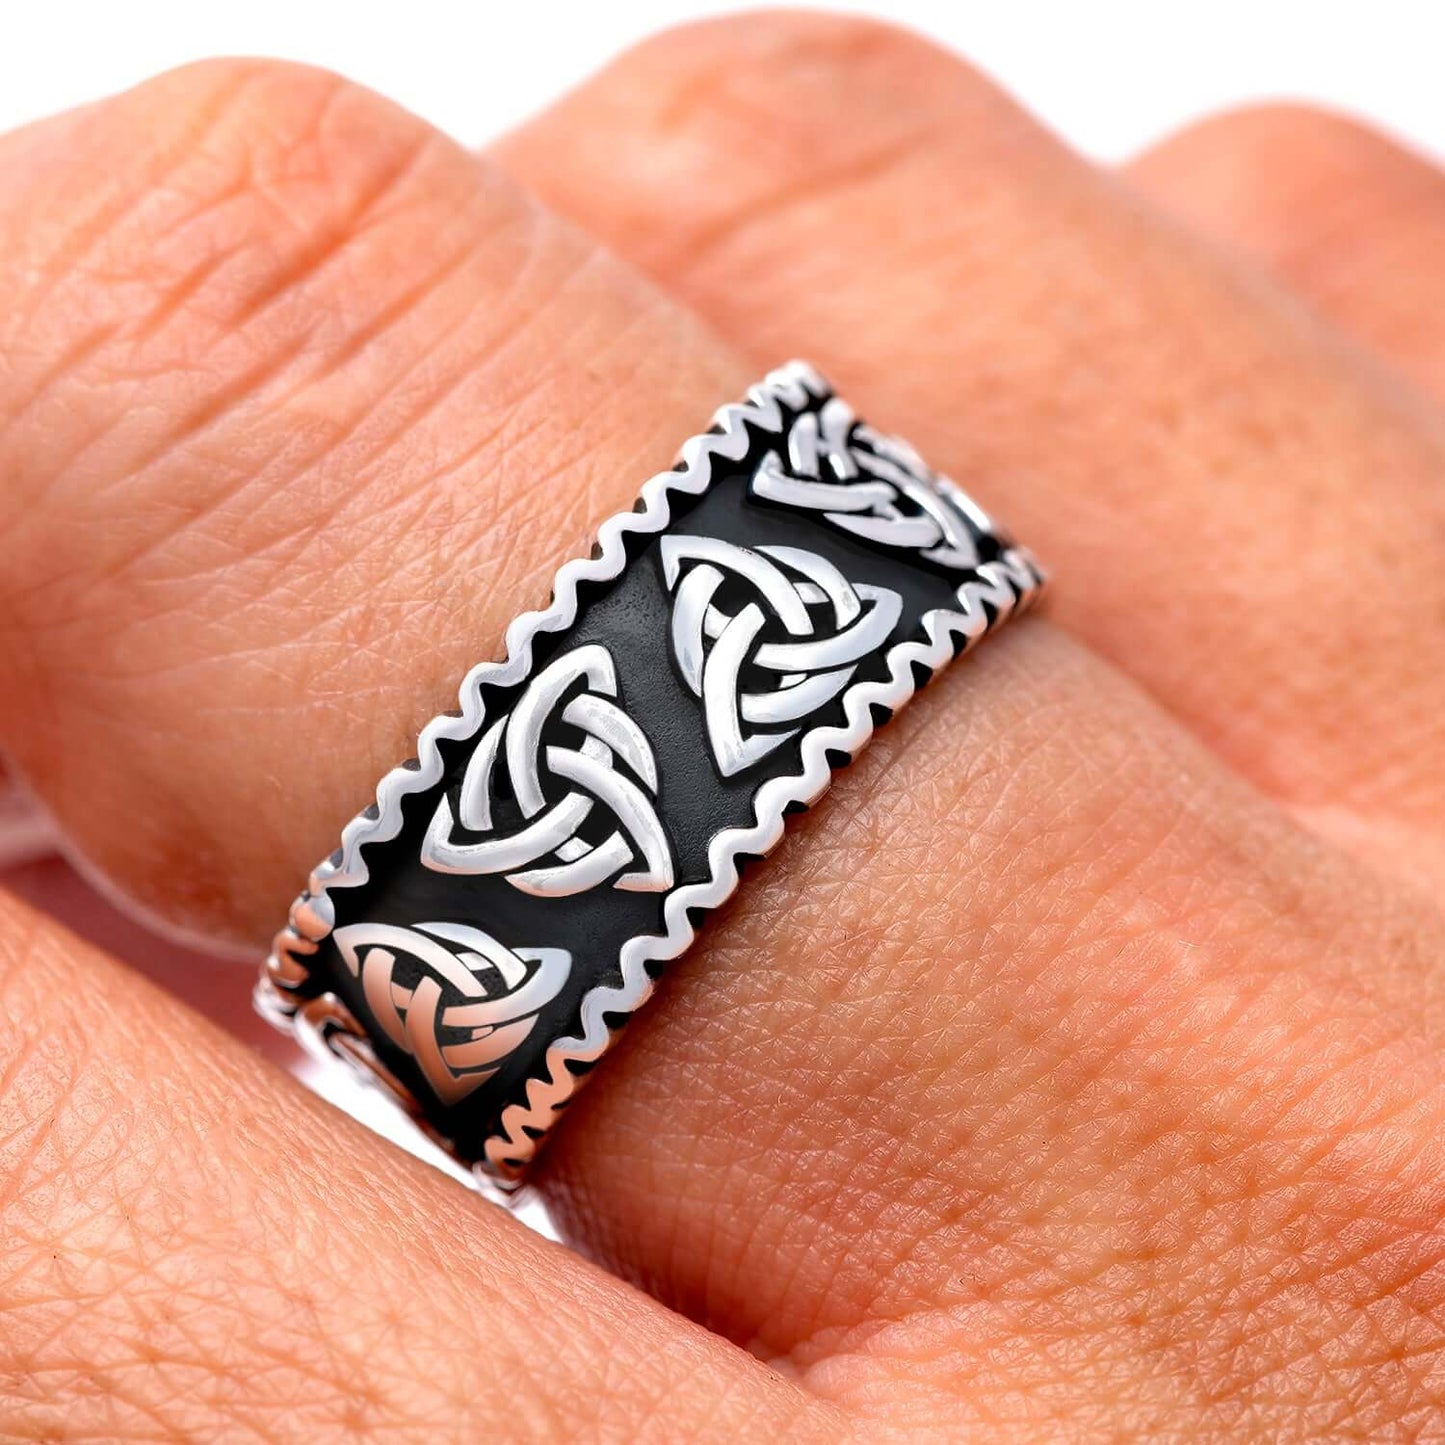 925 Sterling Silver Triquetra Knots Ring - SilverMania925